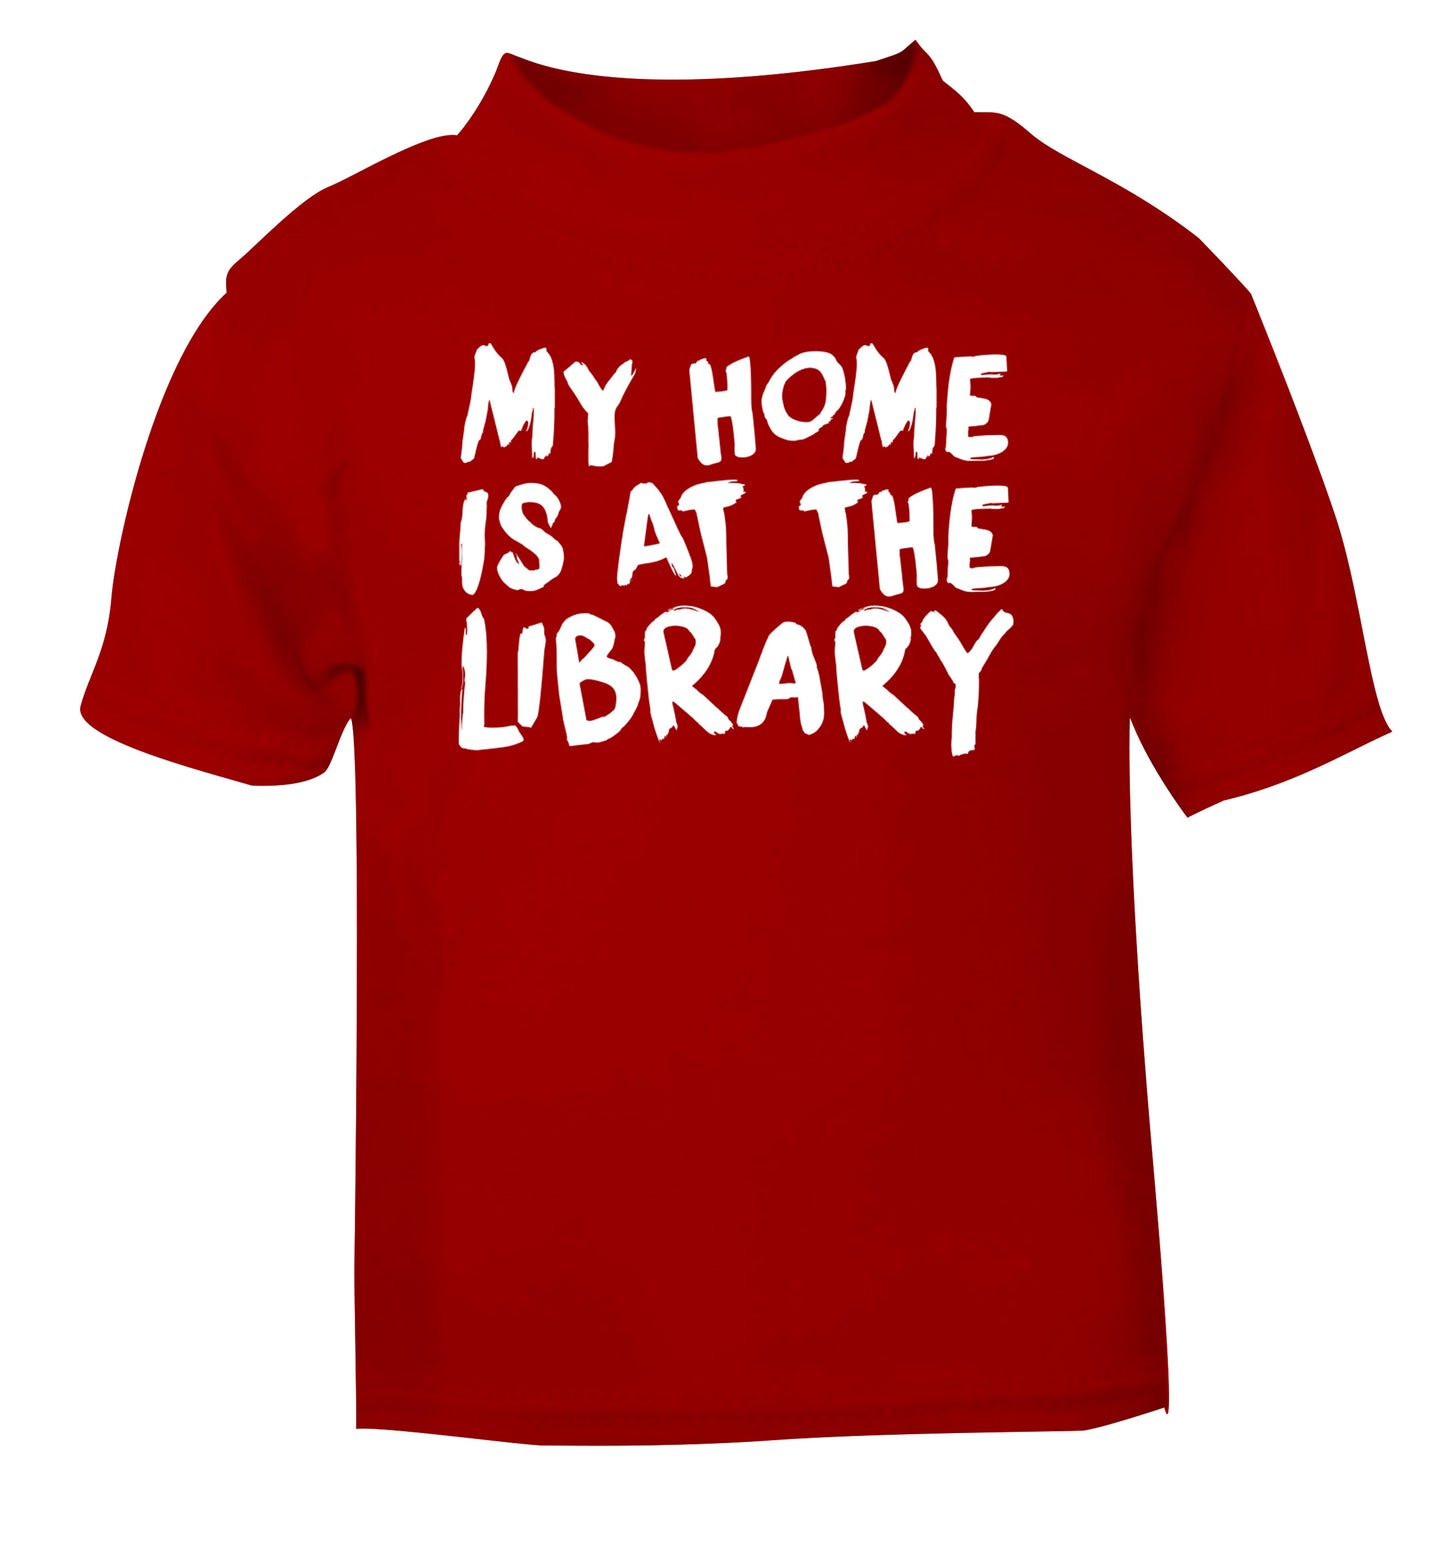 My home is at the library red Baby Toddler Tshirt 2 Years